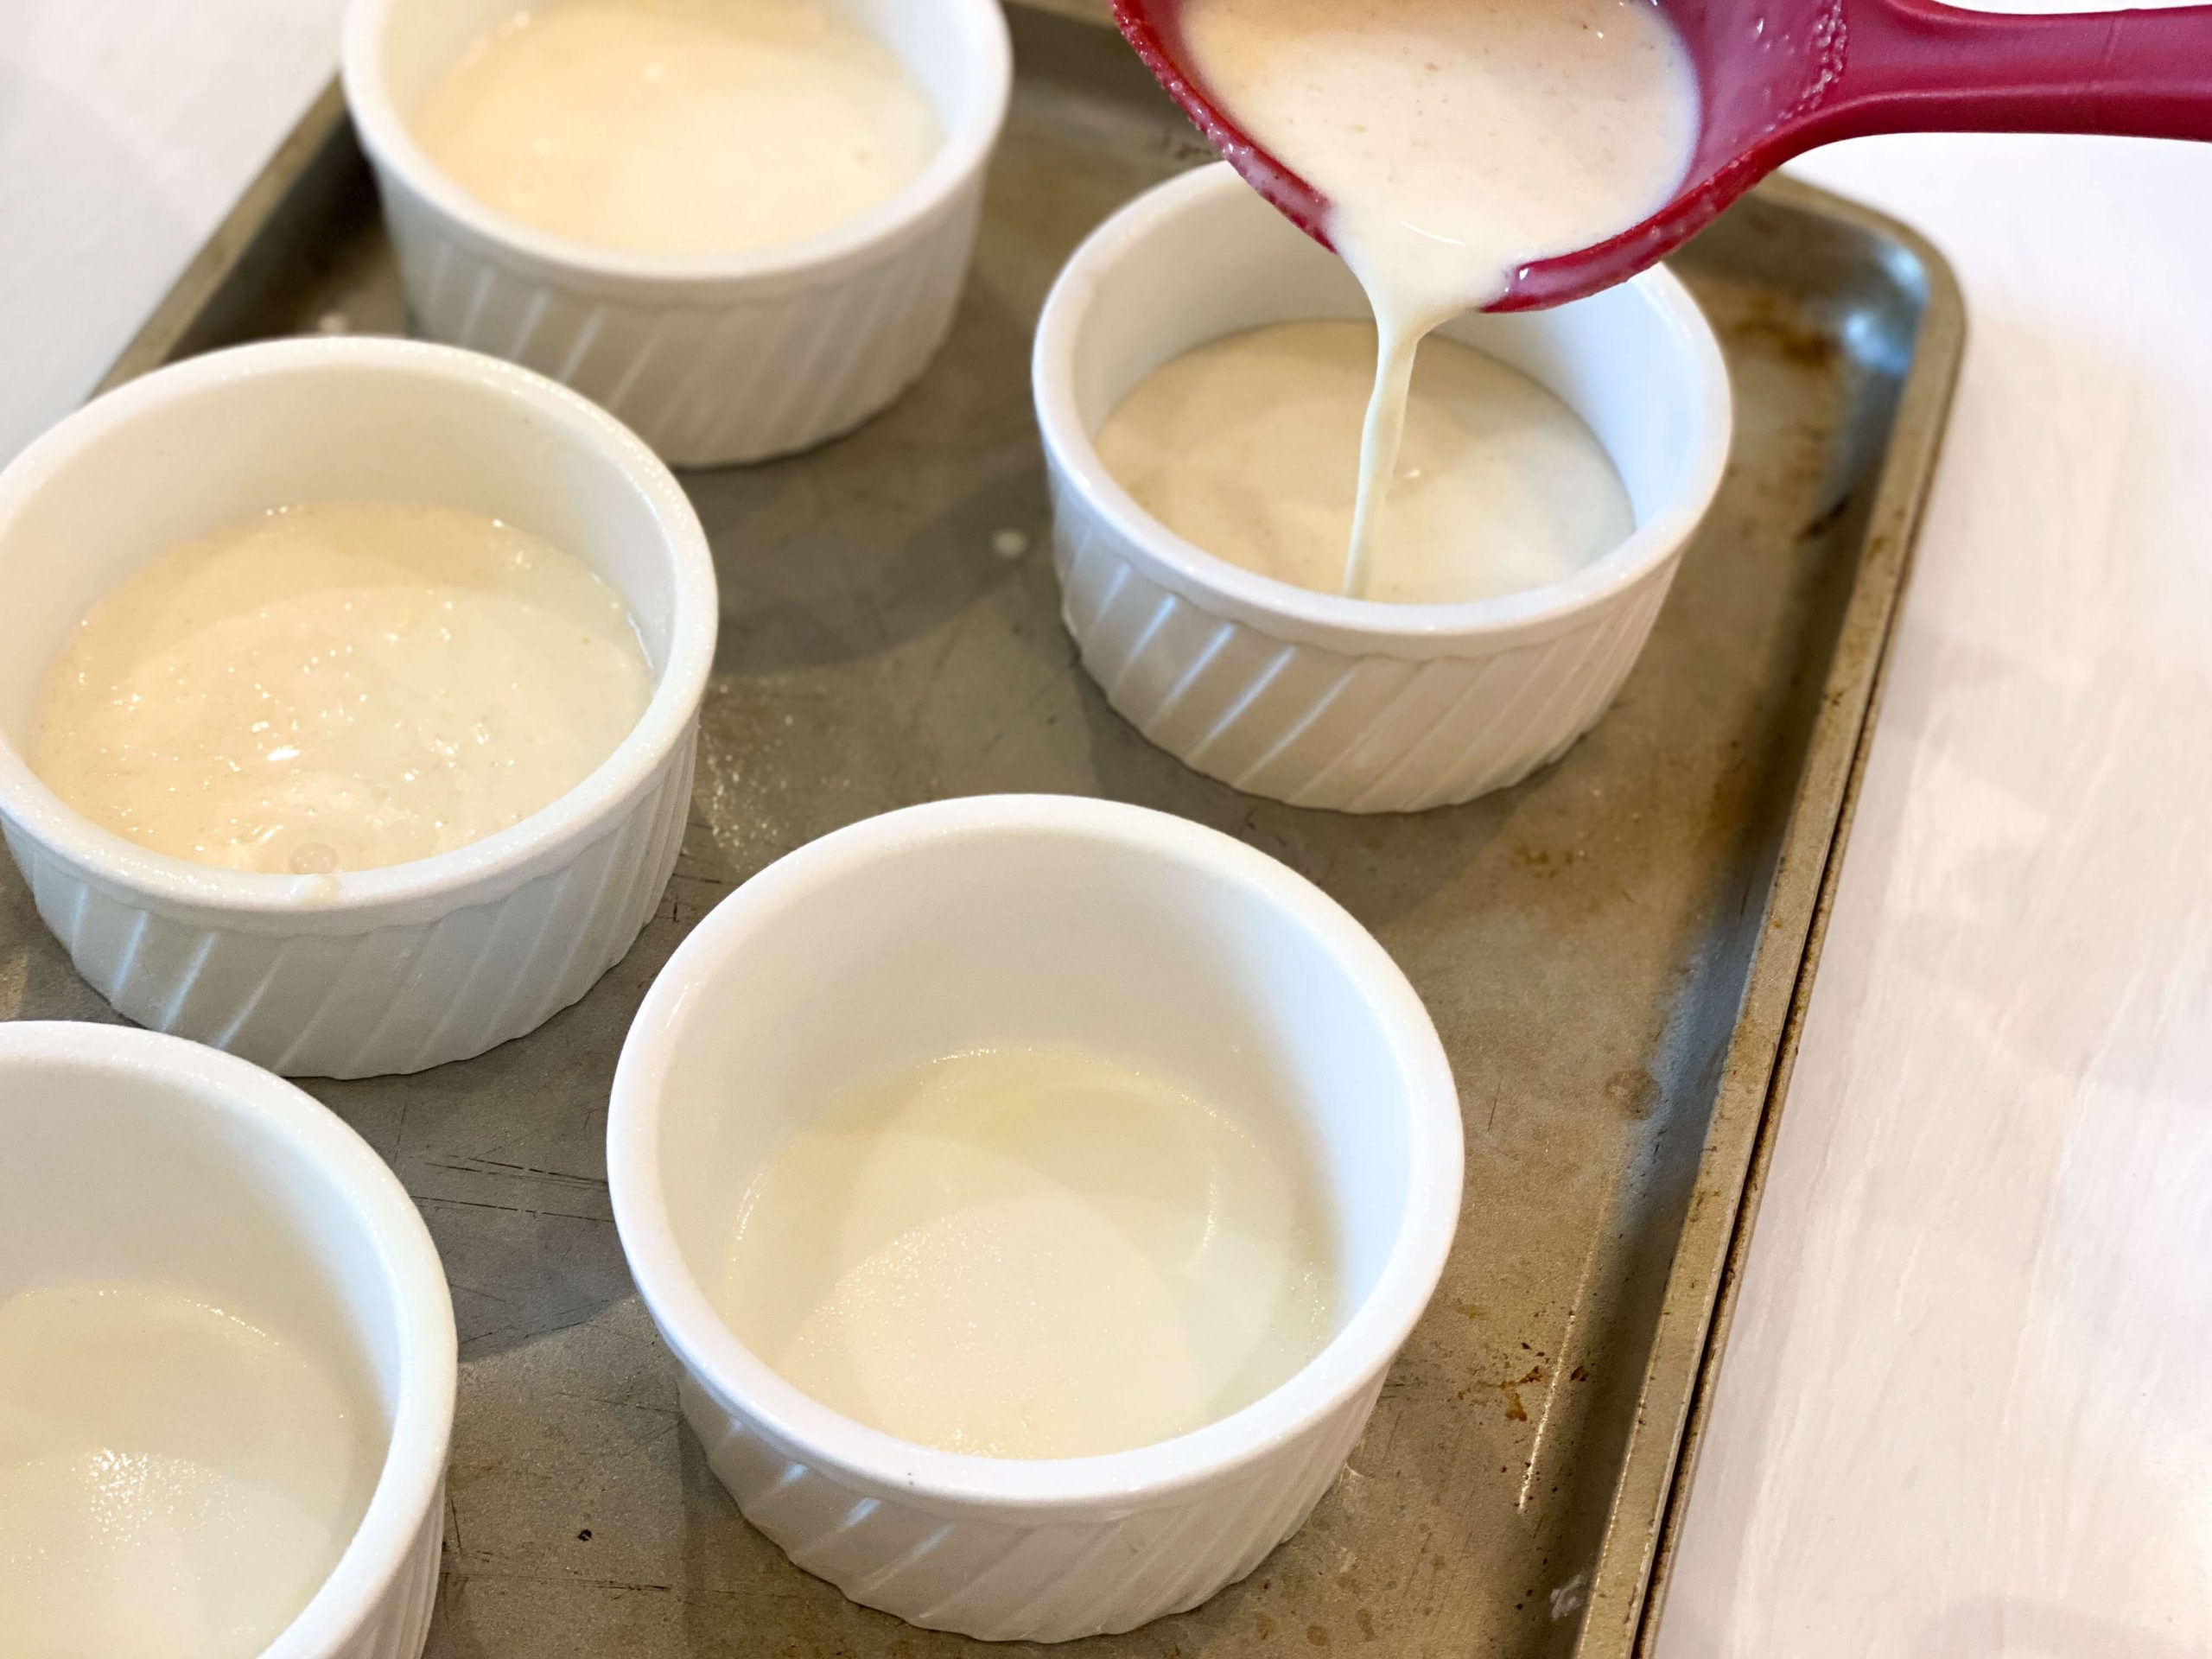 ramequins being filled with panna cotta heavy cream mixture